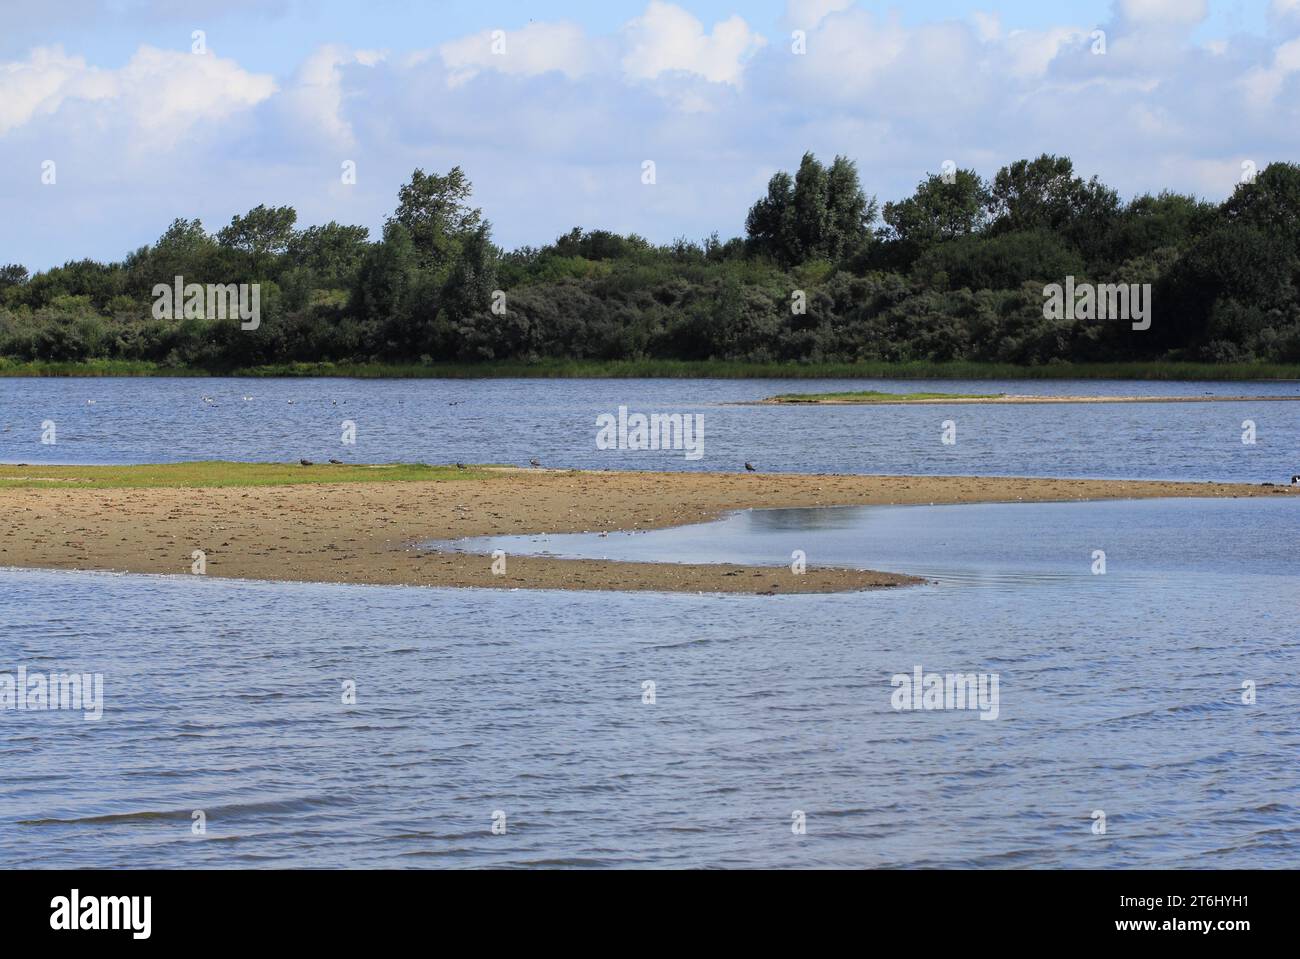 Water surface with small sand island, blue sky in background Stock Photo